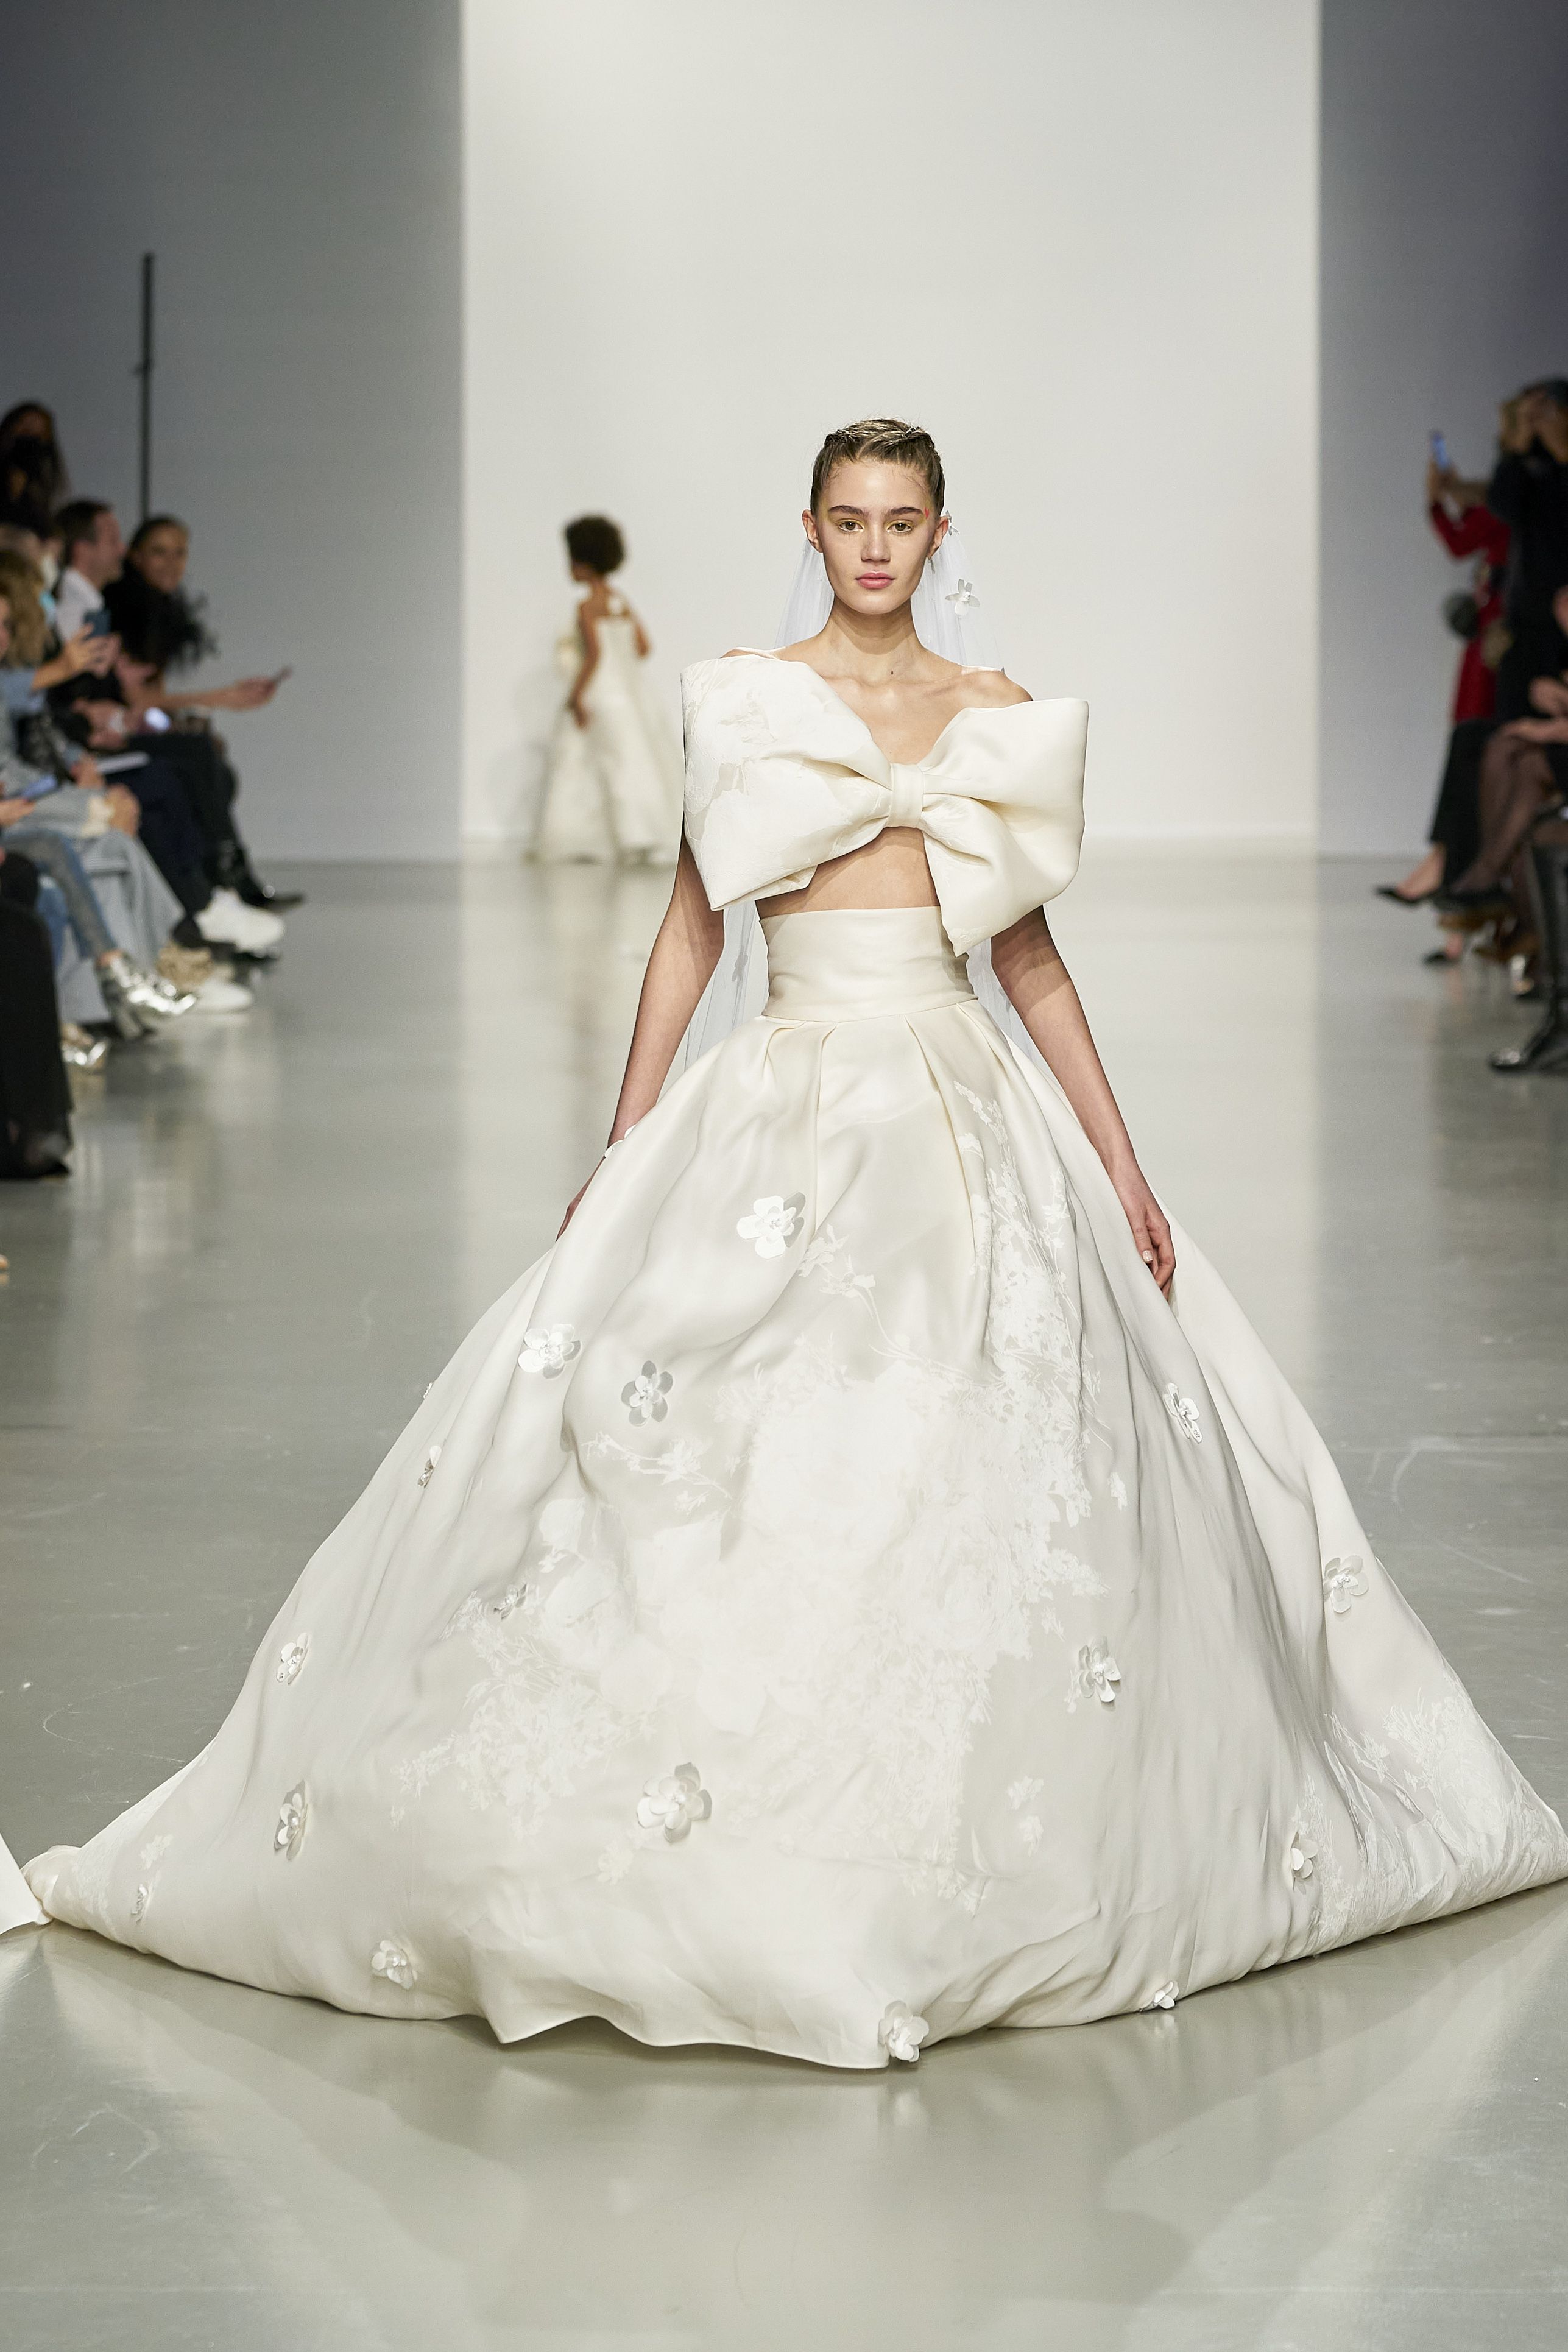 Wedding dress inspiration from couture